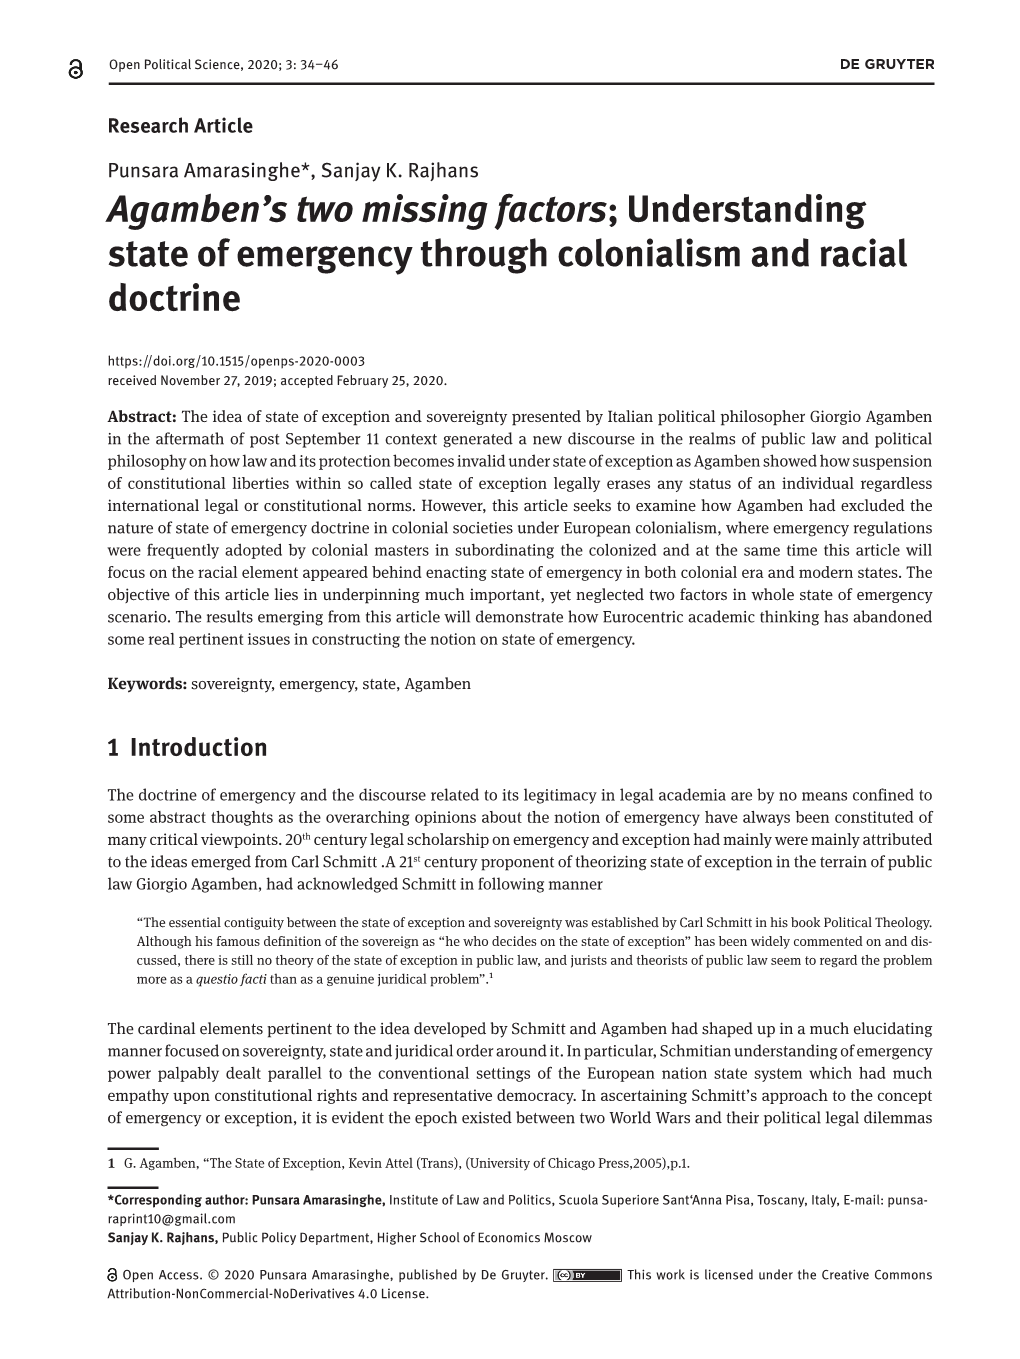 Agamben's Two Missing Factors; Understanding State of Emergency